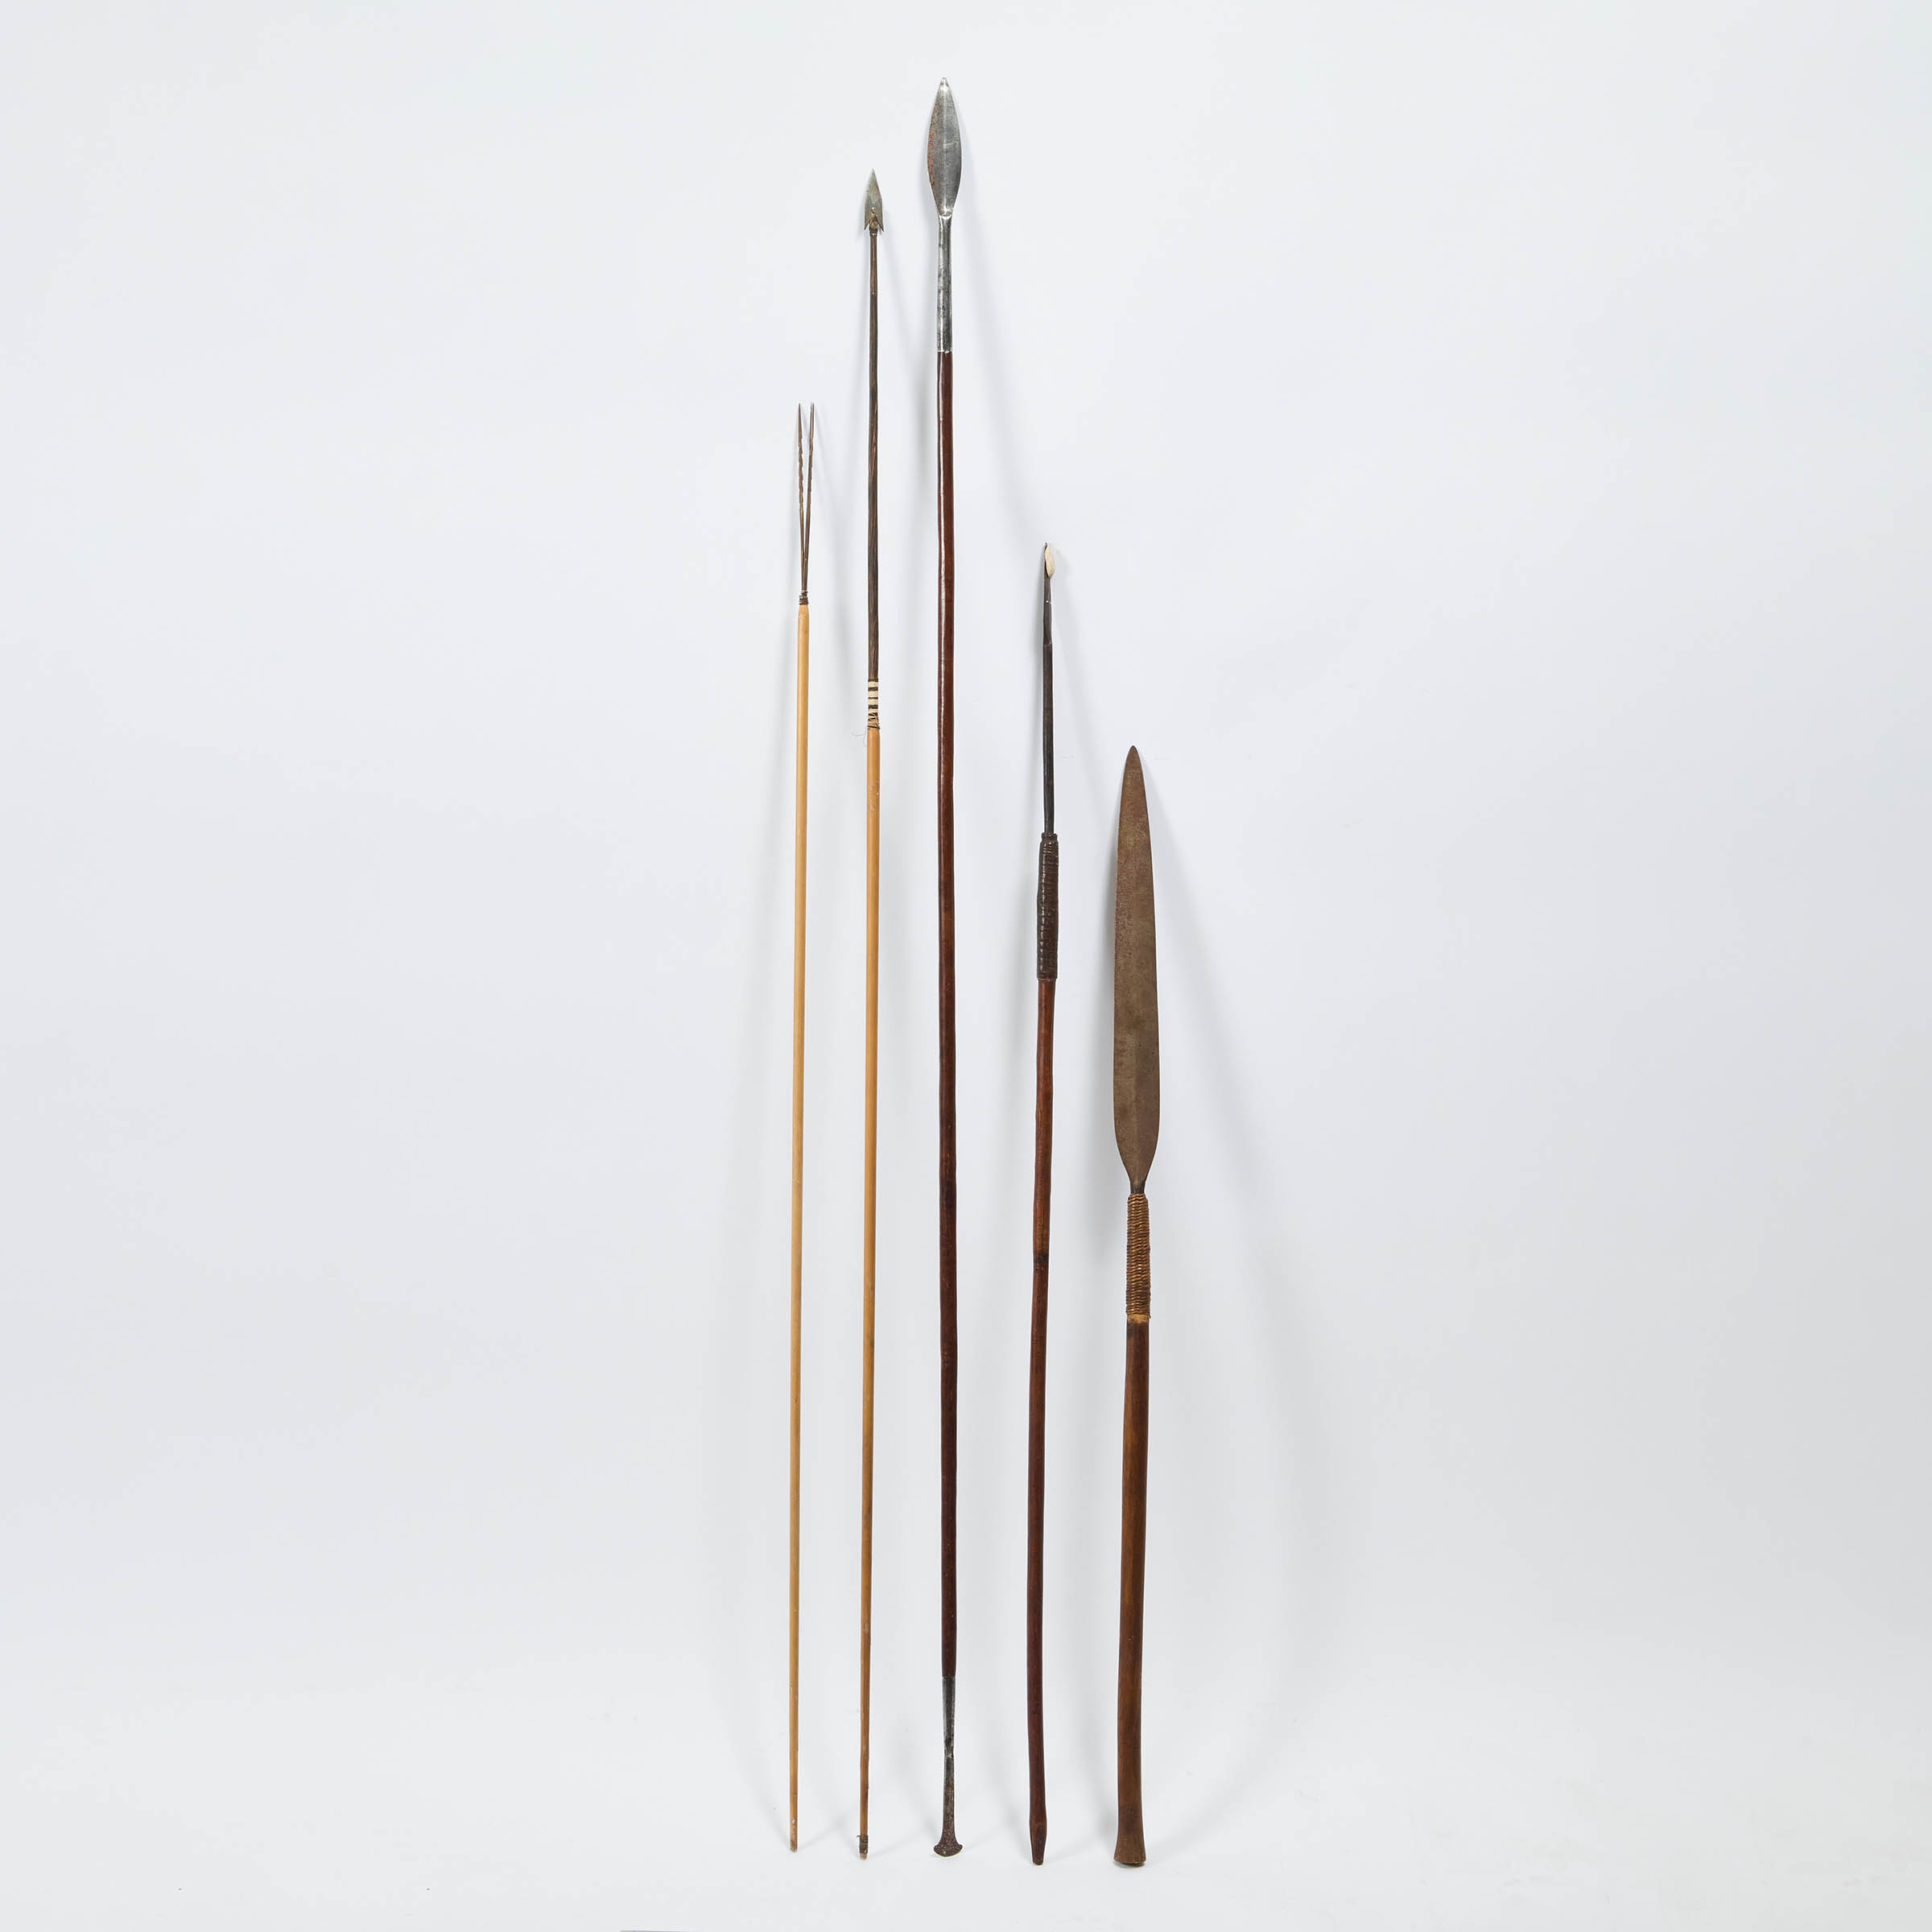 Group of Five Tribal Spears, 20th century